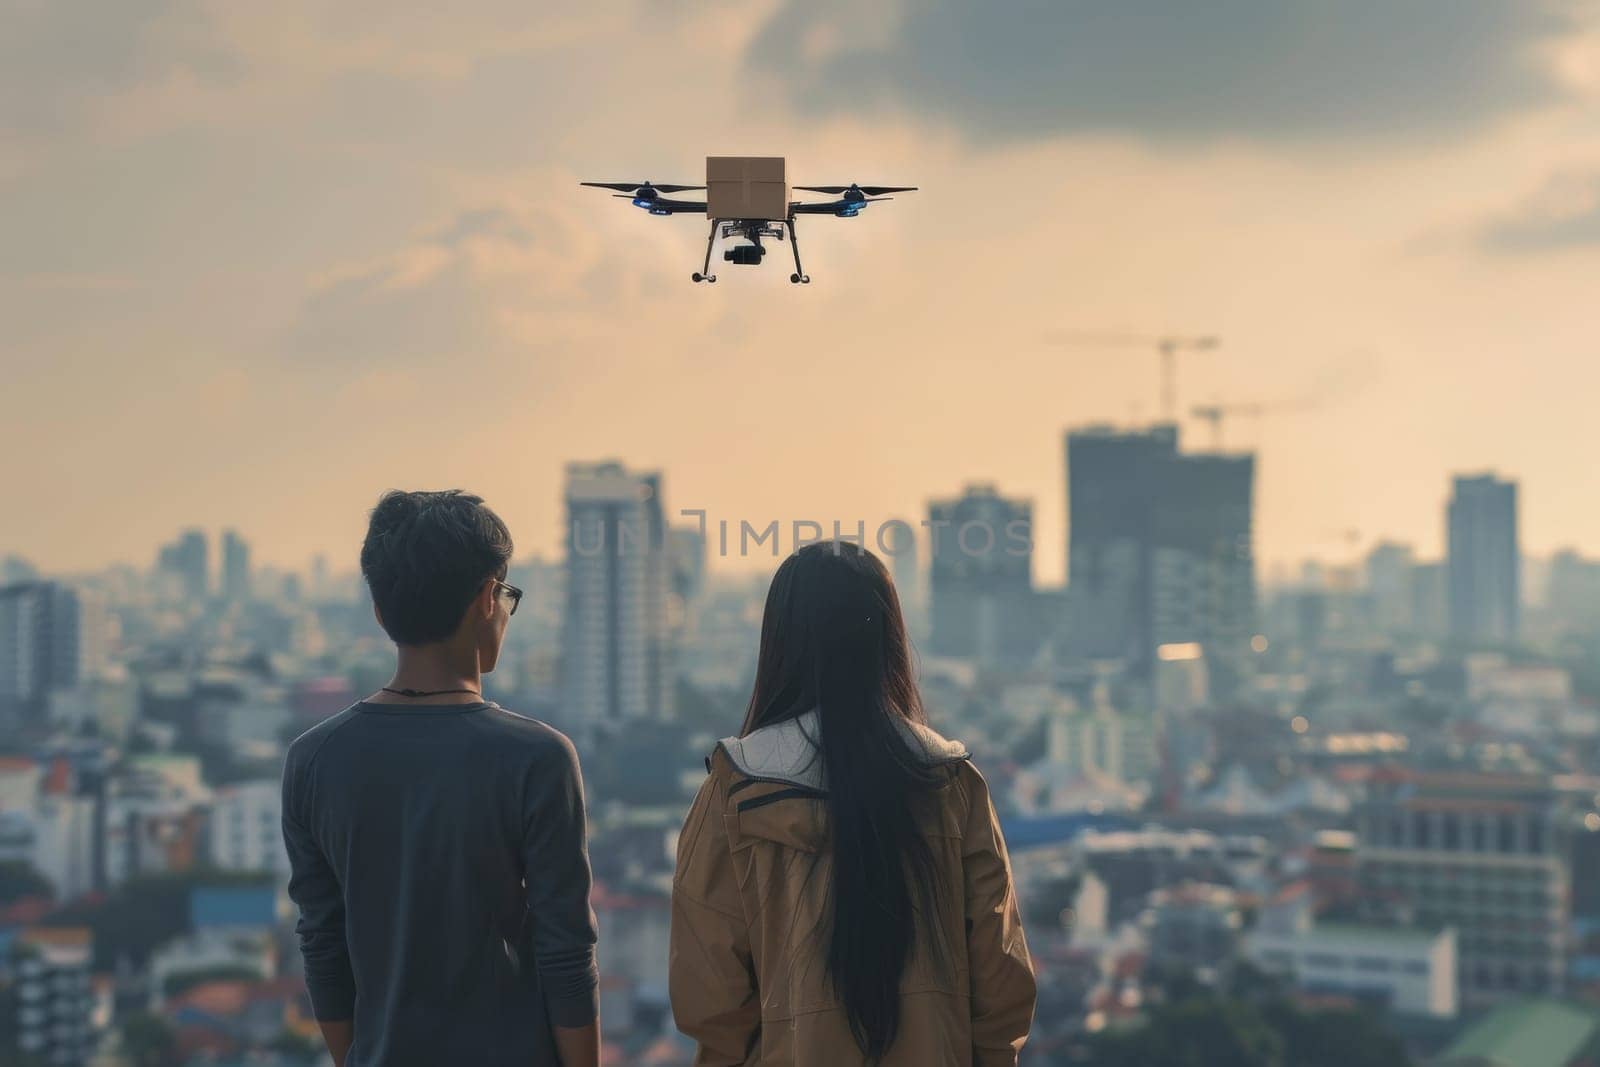 Two people are standing on a sidewalk, looking up at a drone flying overhead. logistic concept by itchaznong